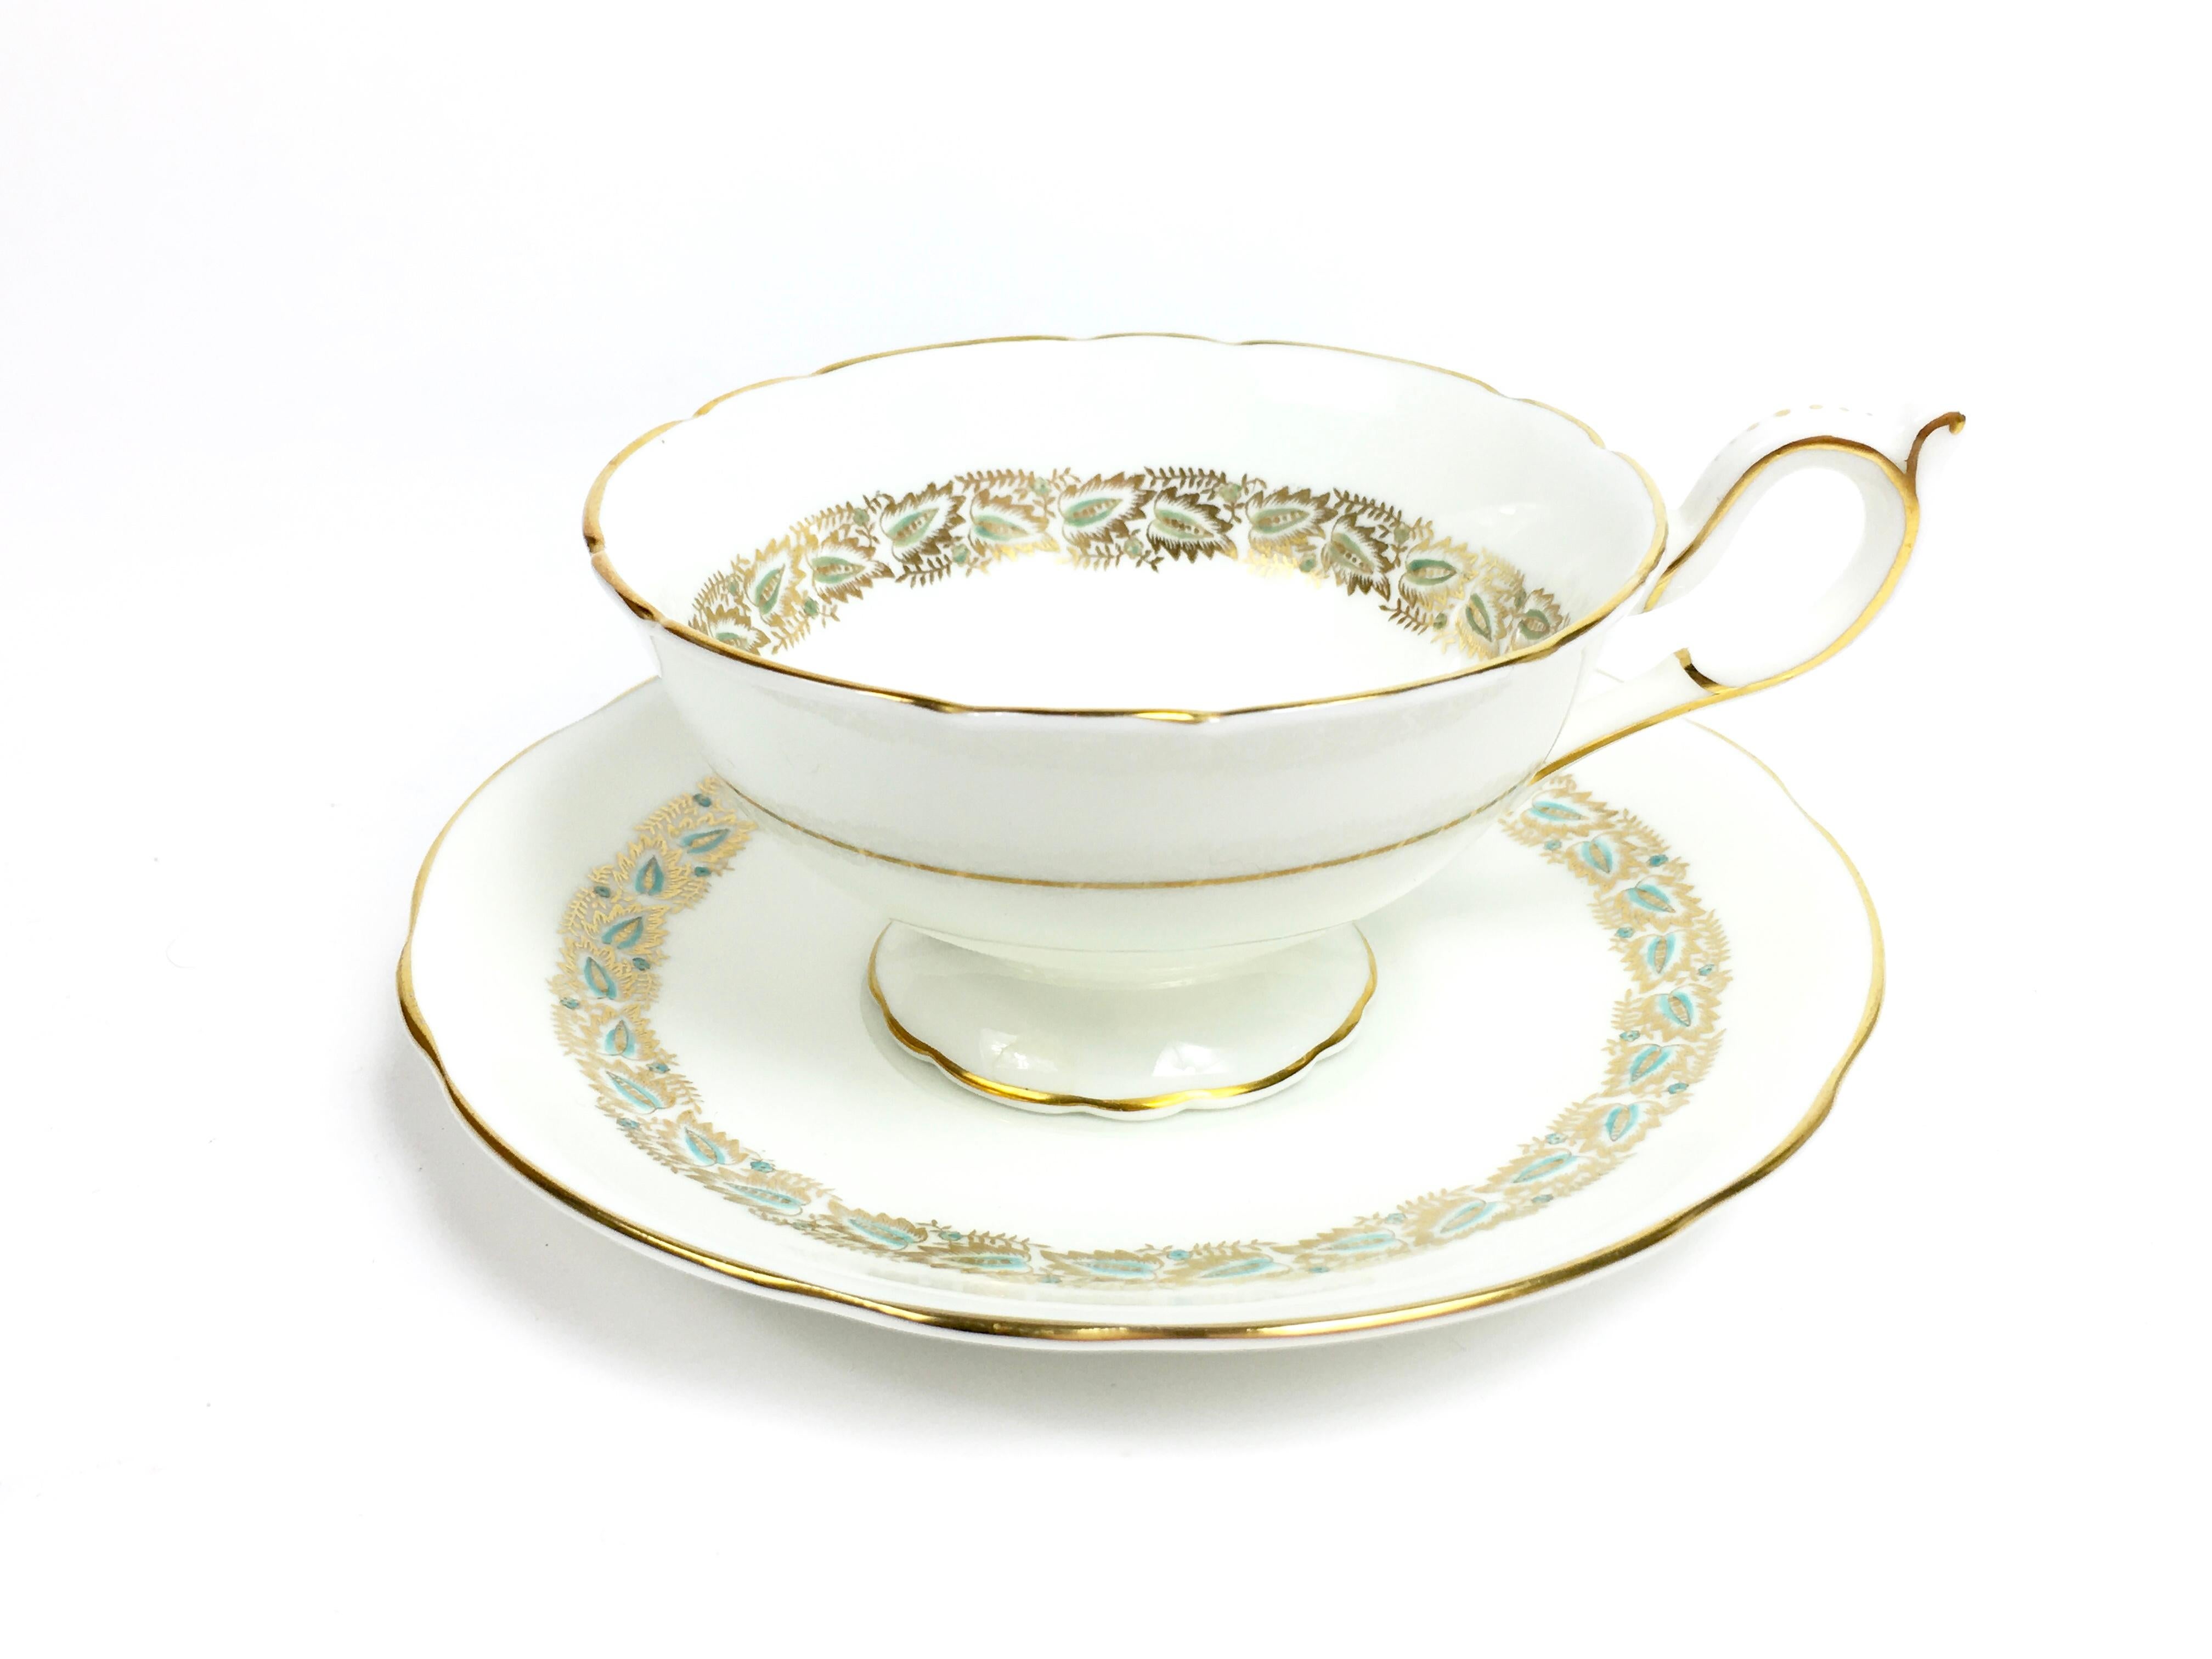 Coalport Starburst Aqua and Gold 5-Piece Place Service for 11 China Service For Sale 3